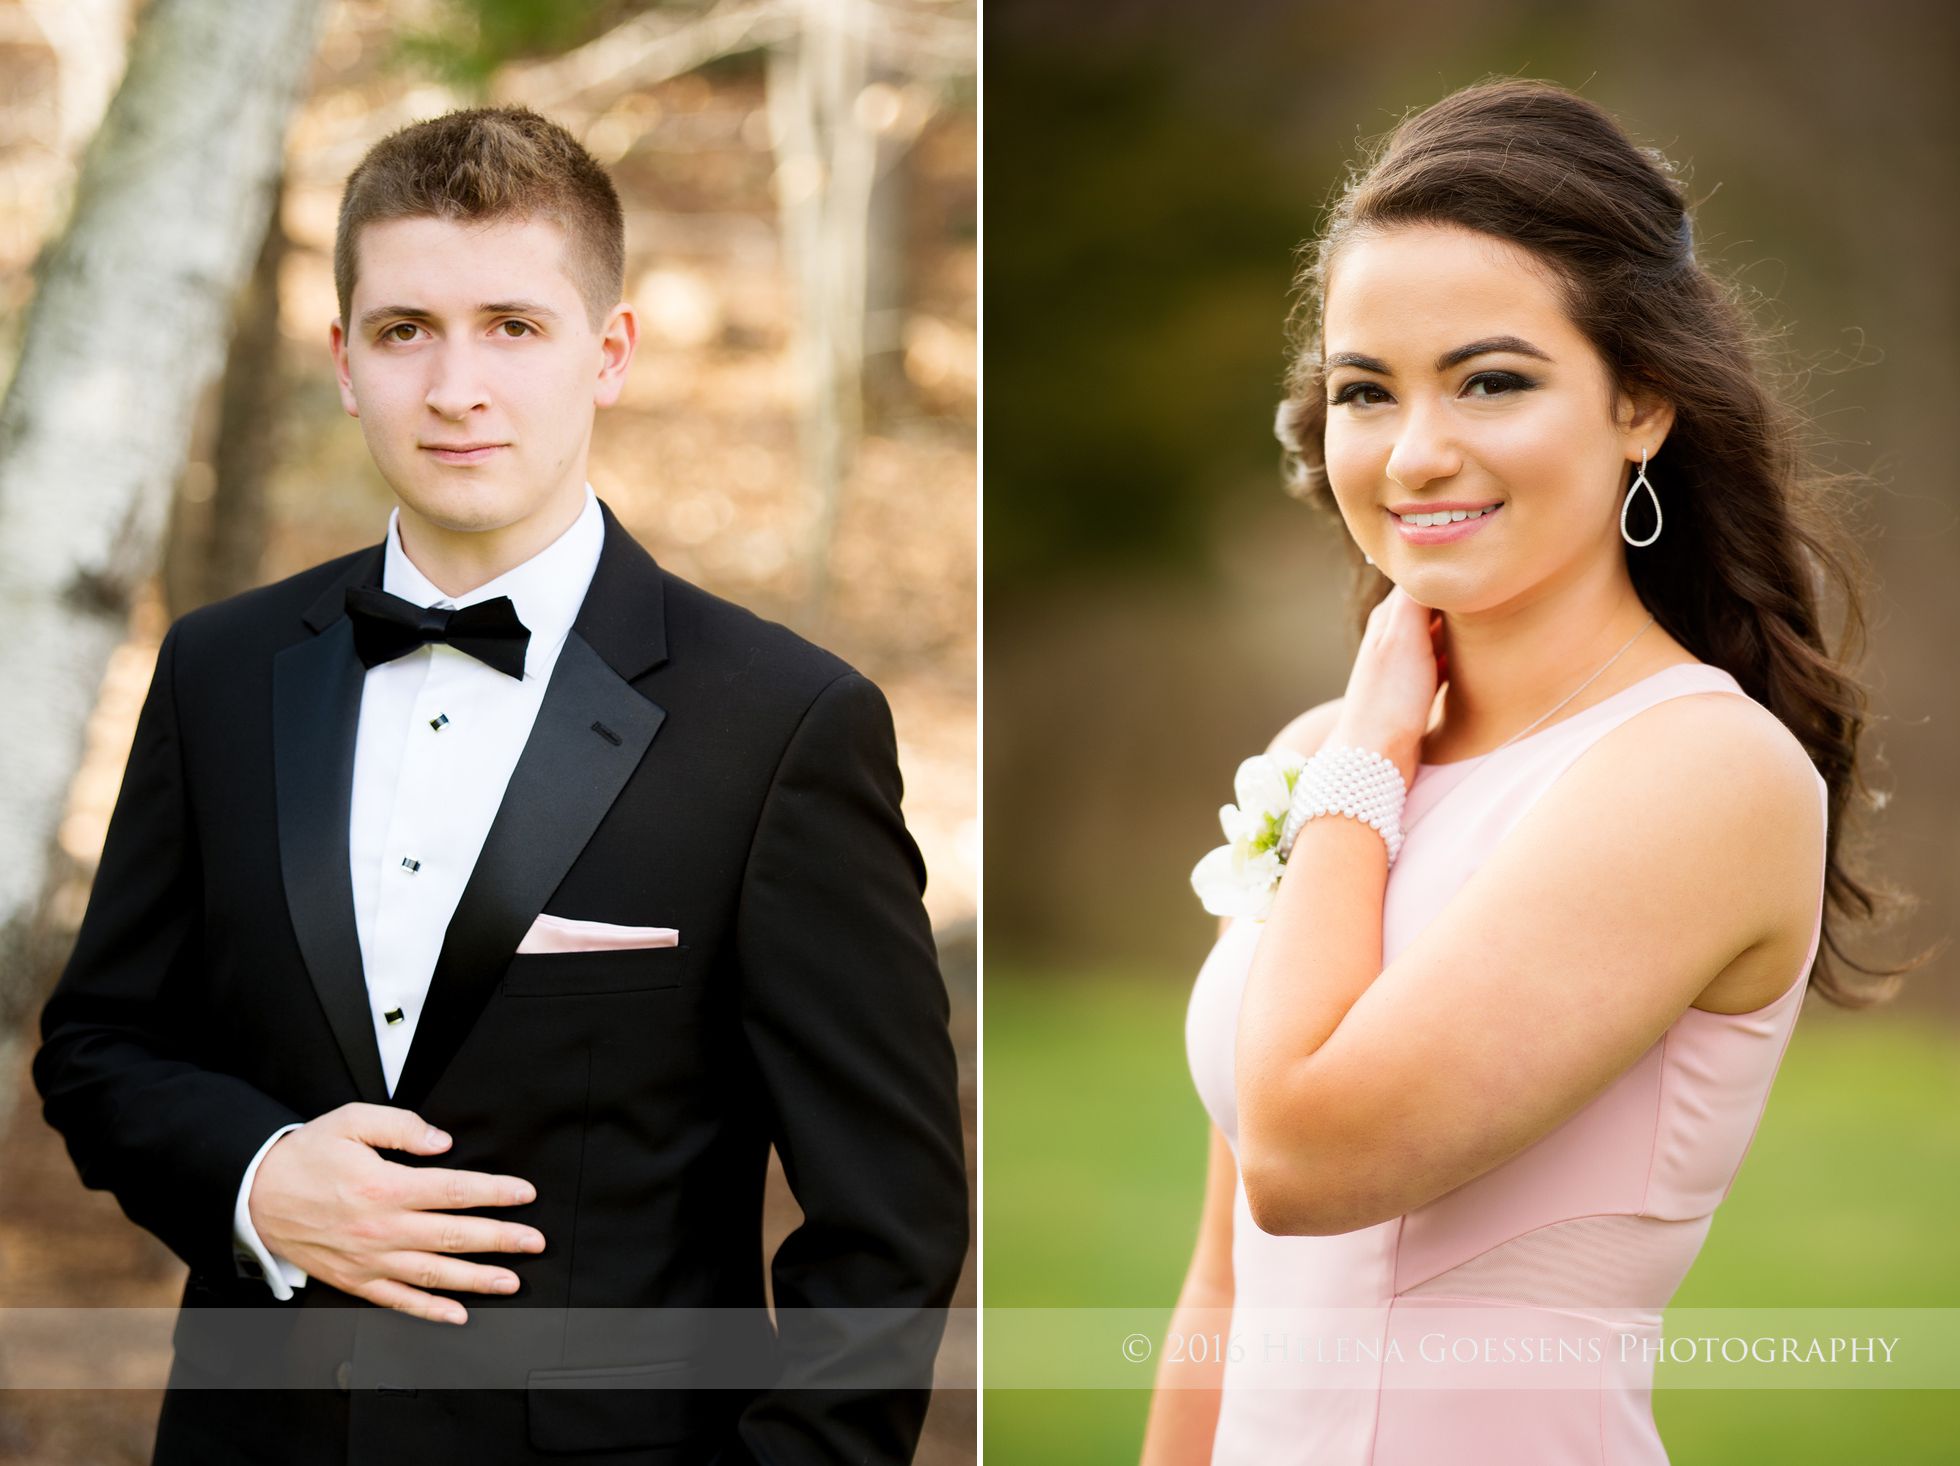 Portraits of a senior boy in a tuxedo and senior girl in a pink dress